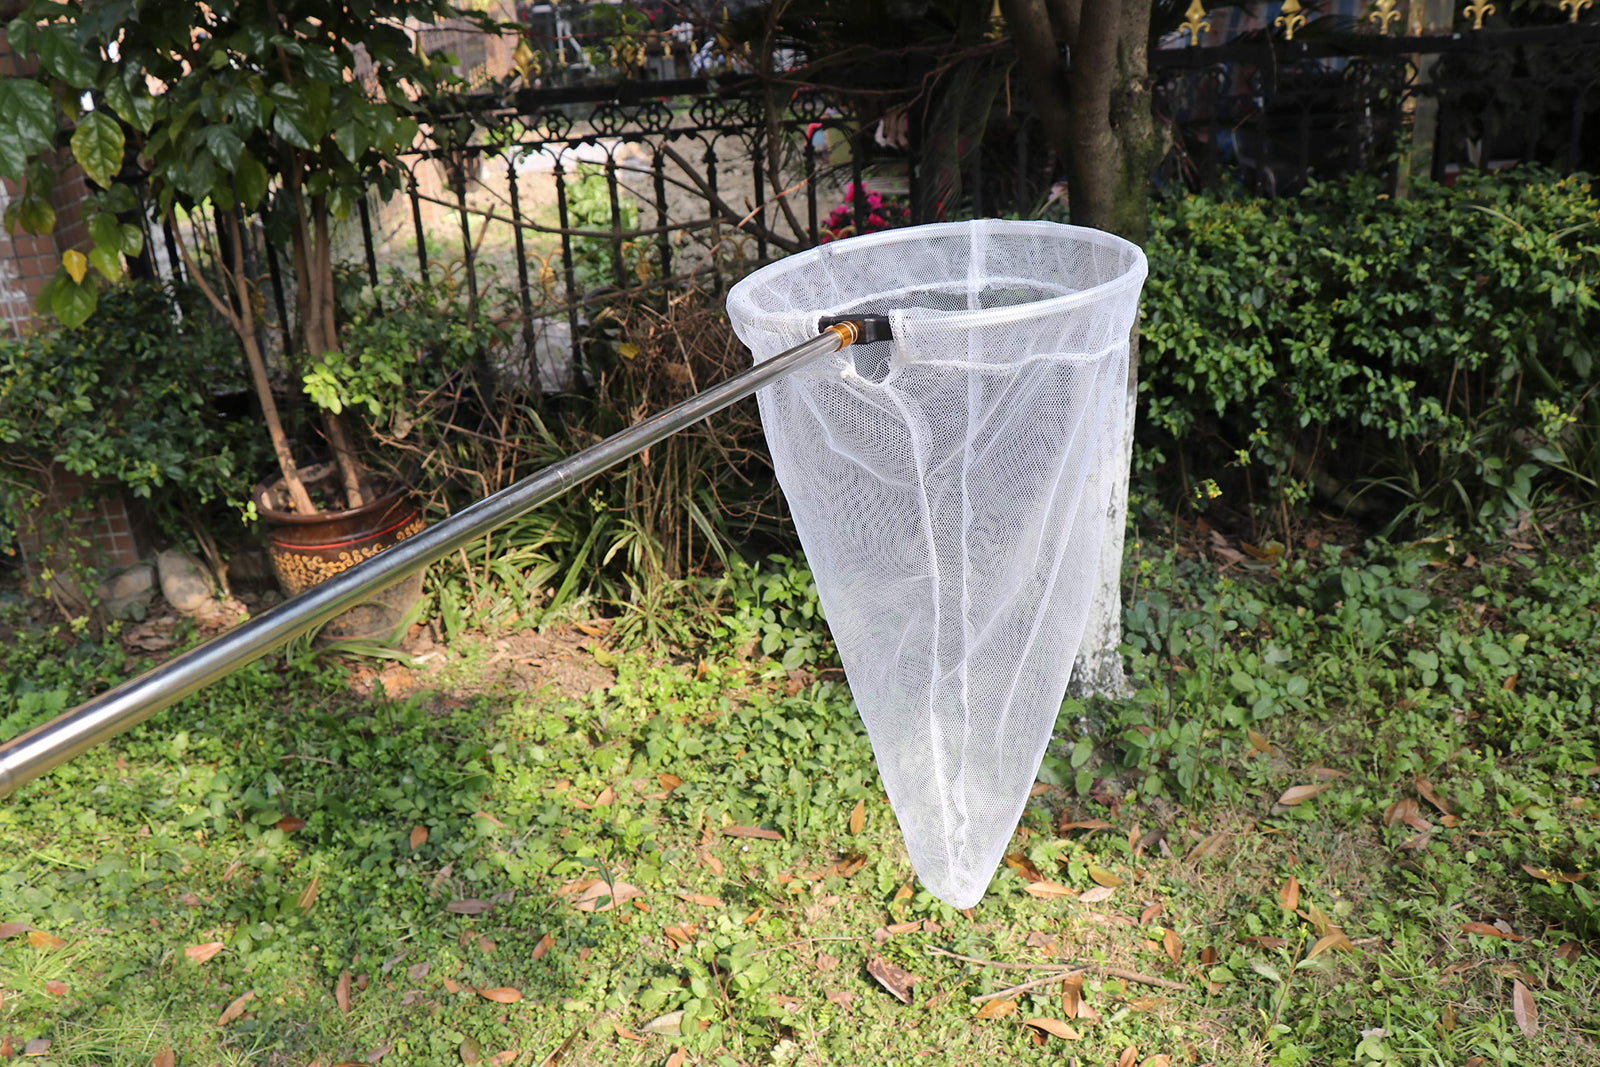 RESTCLOUD Insect and Butterfly Net with 12" Ring, 24" Net Depth, Handle Extends to 59 Inches for Adults and Kids (12" Ring, 59" Handle)